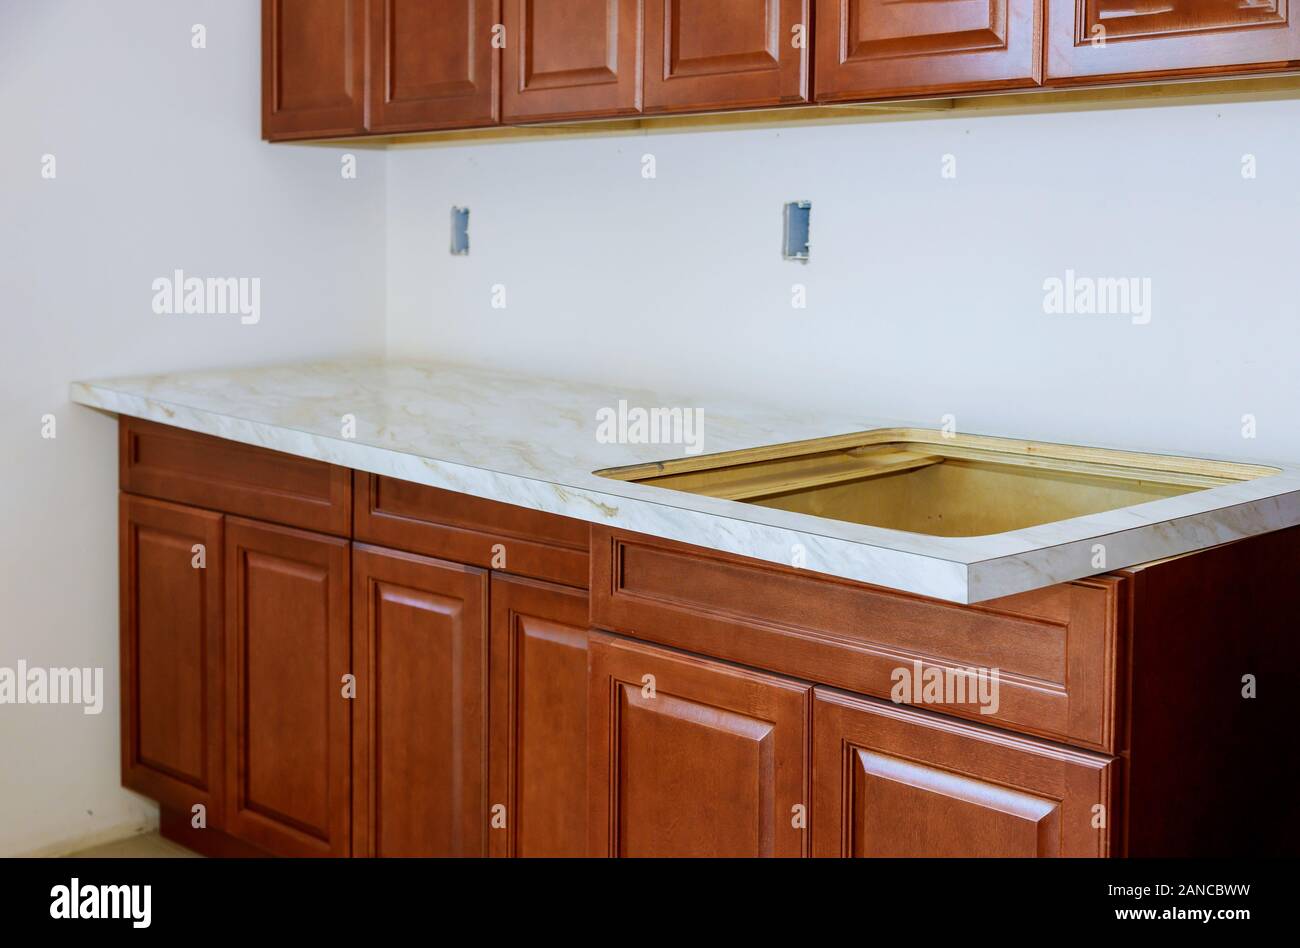 Installing A New Laminate Kitchen Counter Top In A Kitchen Stock